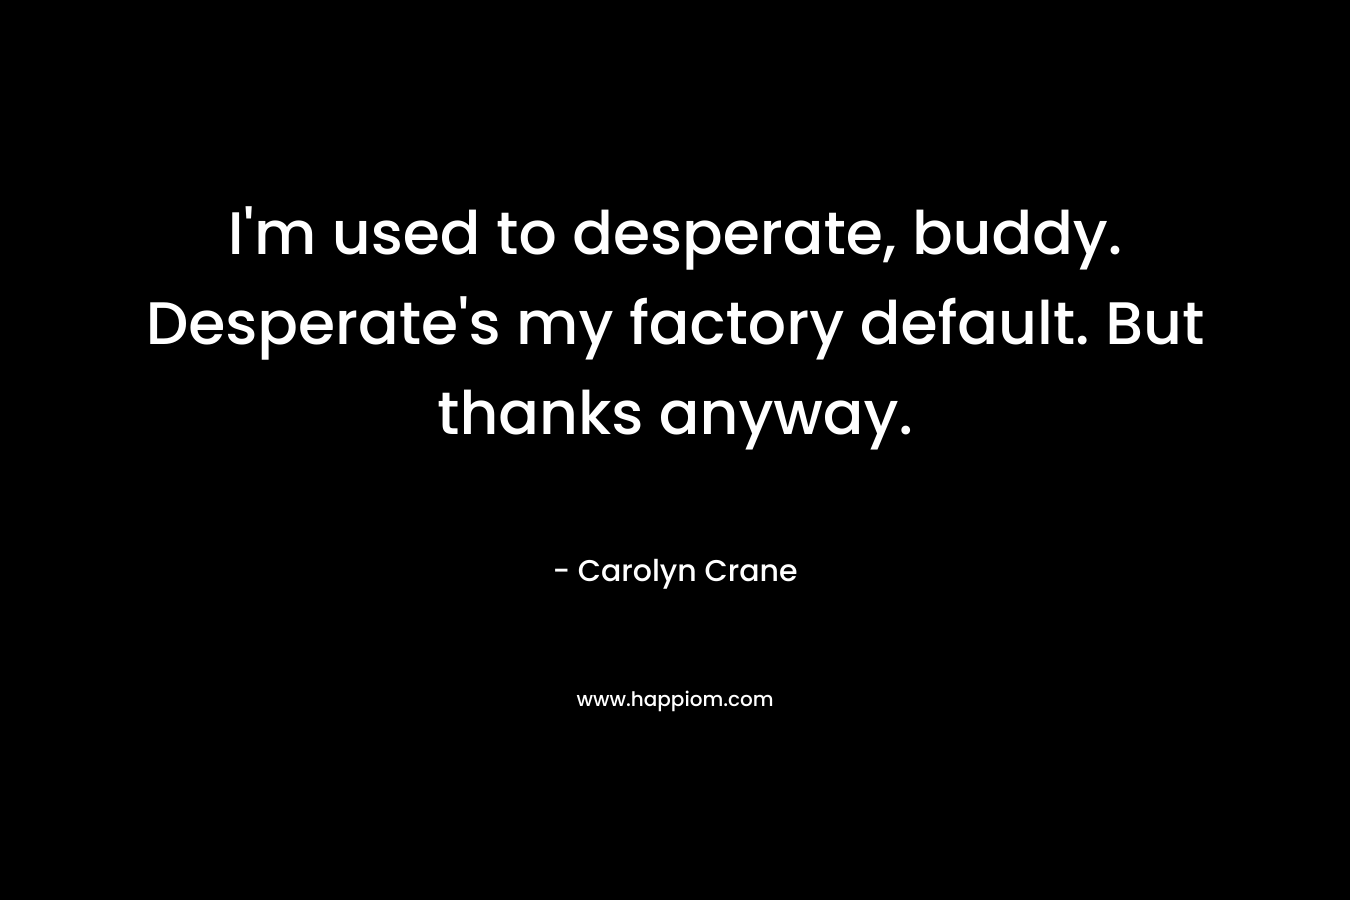 I’m used to desperate, buddy. Desperate’s my factory default. But thanks anyway. – Carolyn Crane